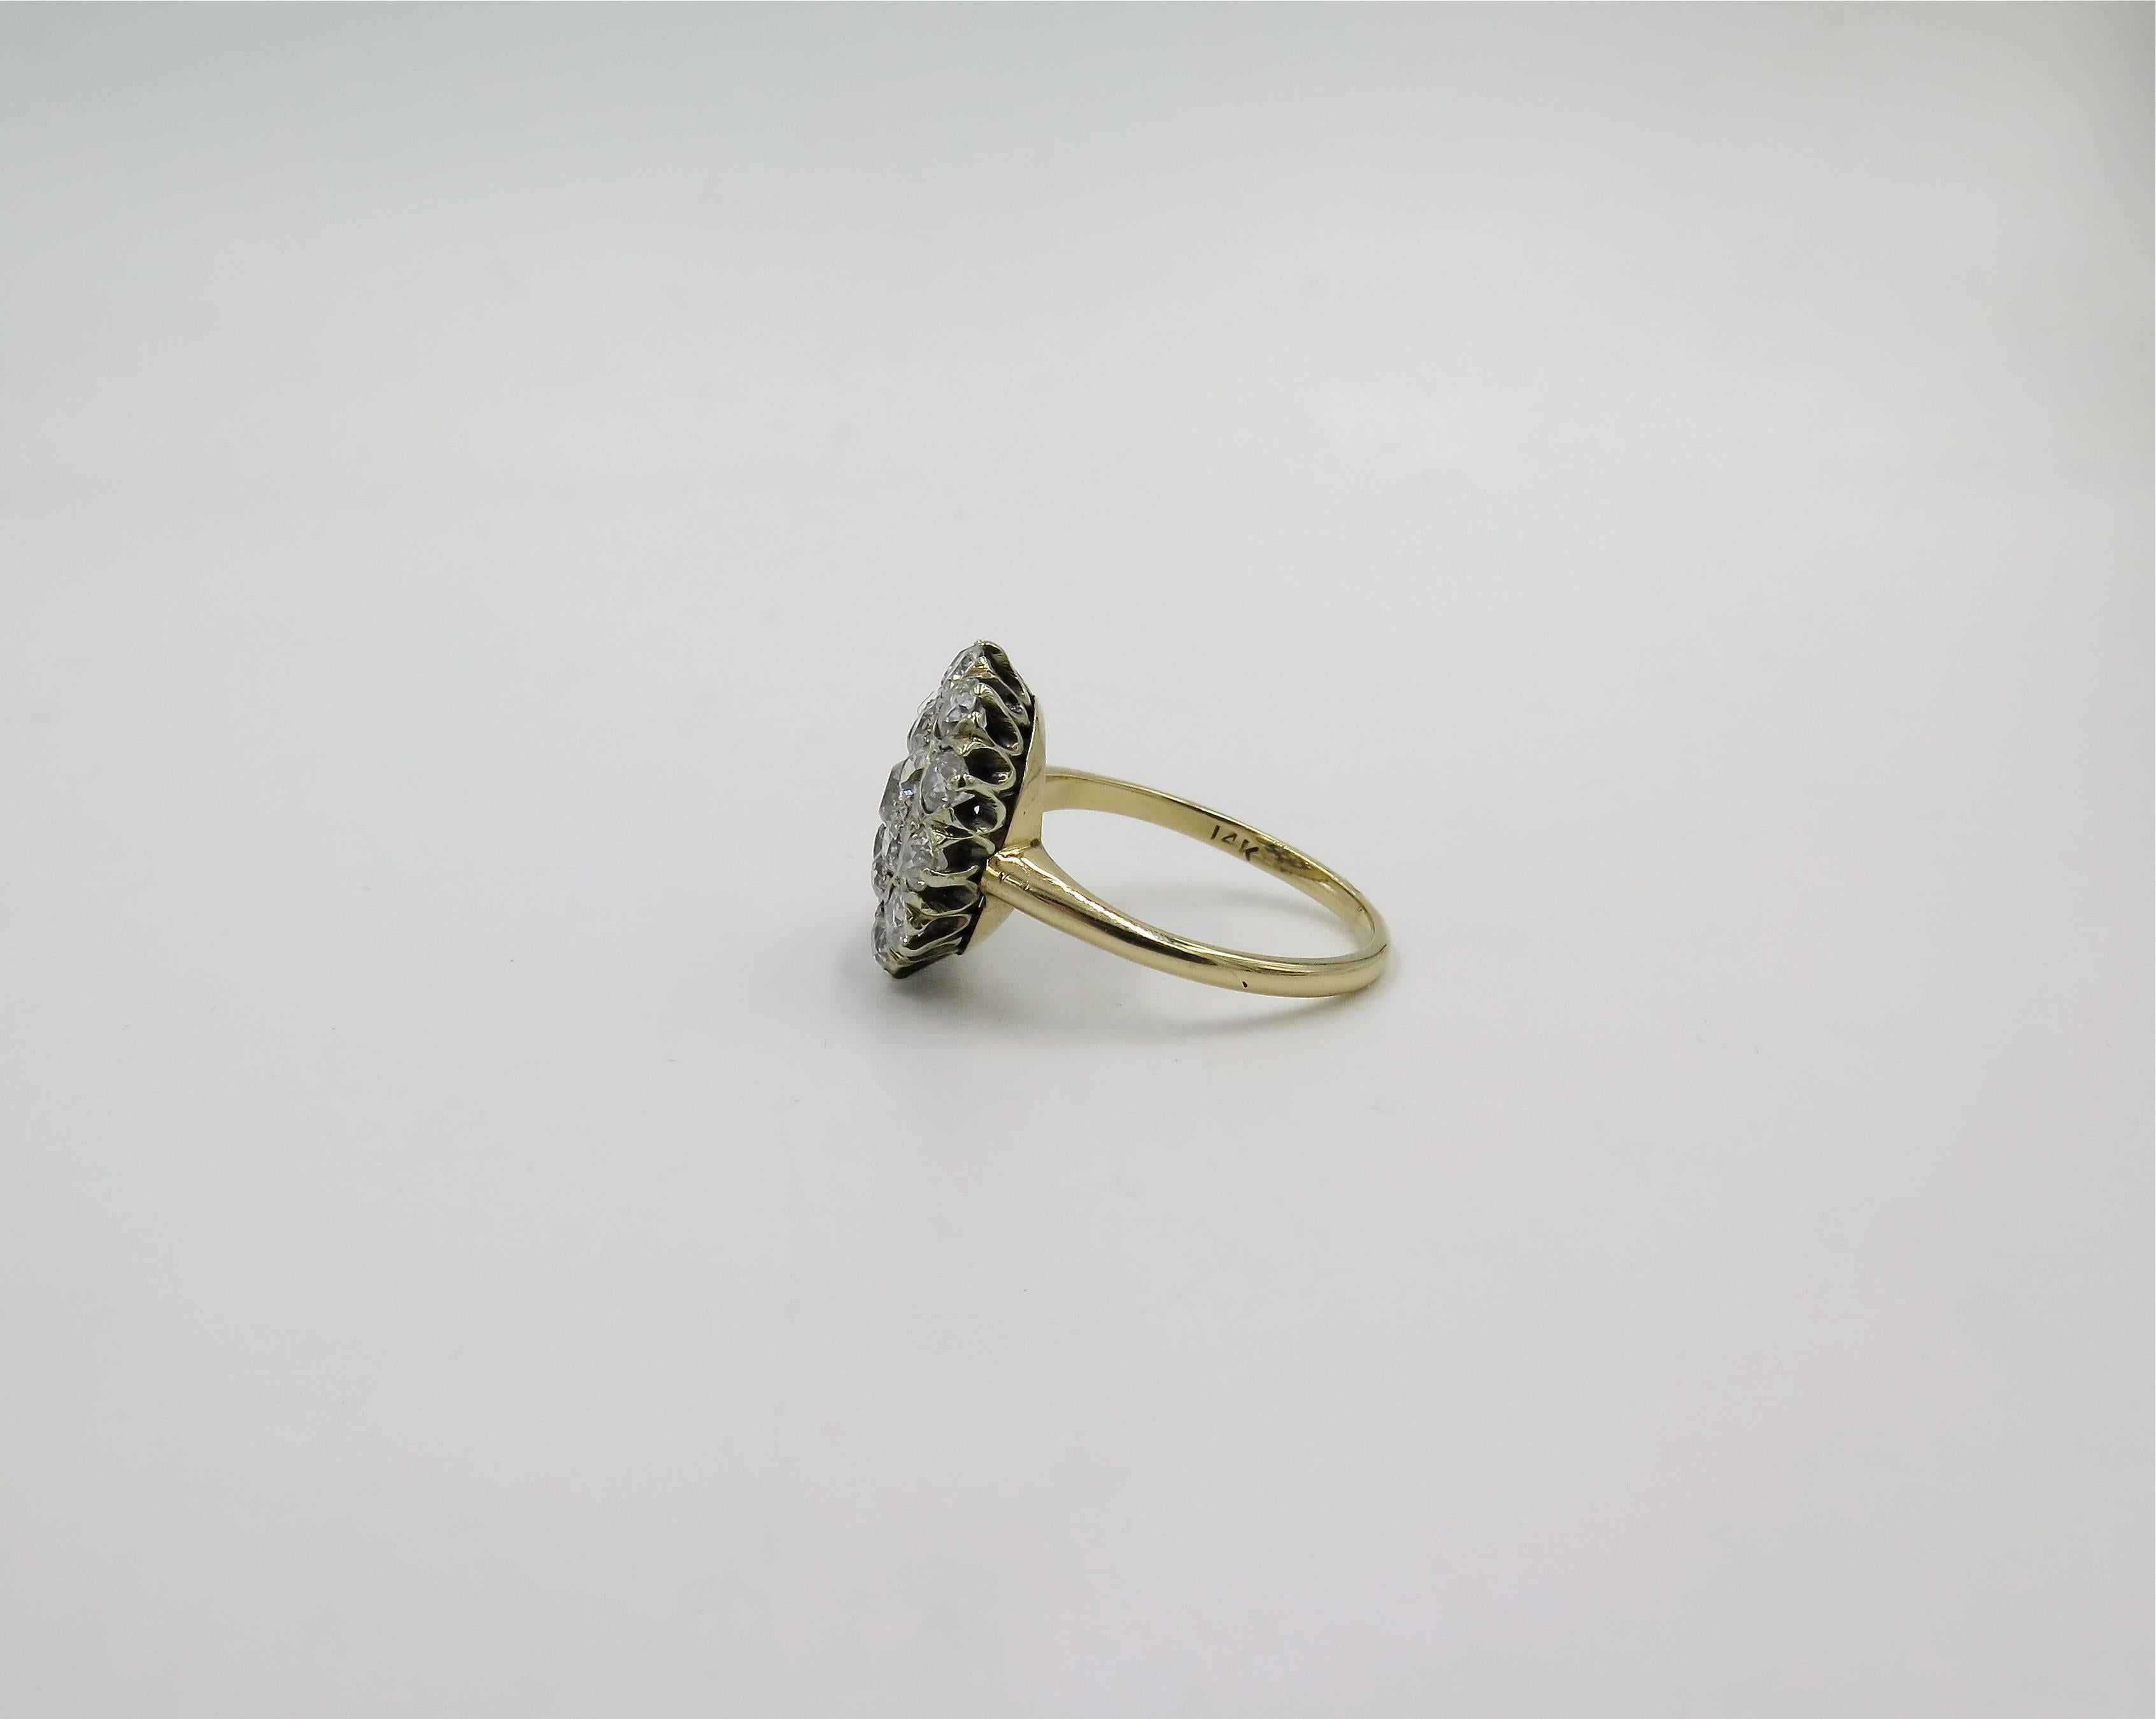 A silver topped 14 karat yellow gold and diamond ring. Circa 1930. Designed as a cluster of old European cut diamonds, with yellow gold shank. Twenty one (21) diamonds weigh approximately 2.00 carats. Size 7 1/4. Gross weight is approximately 3.5